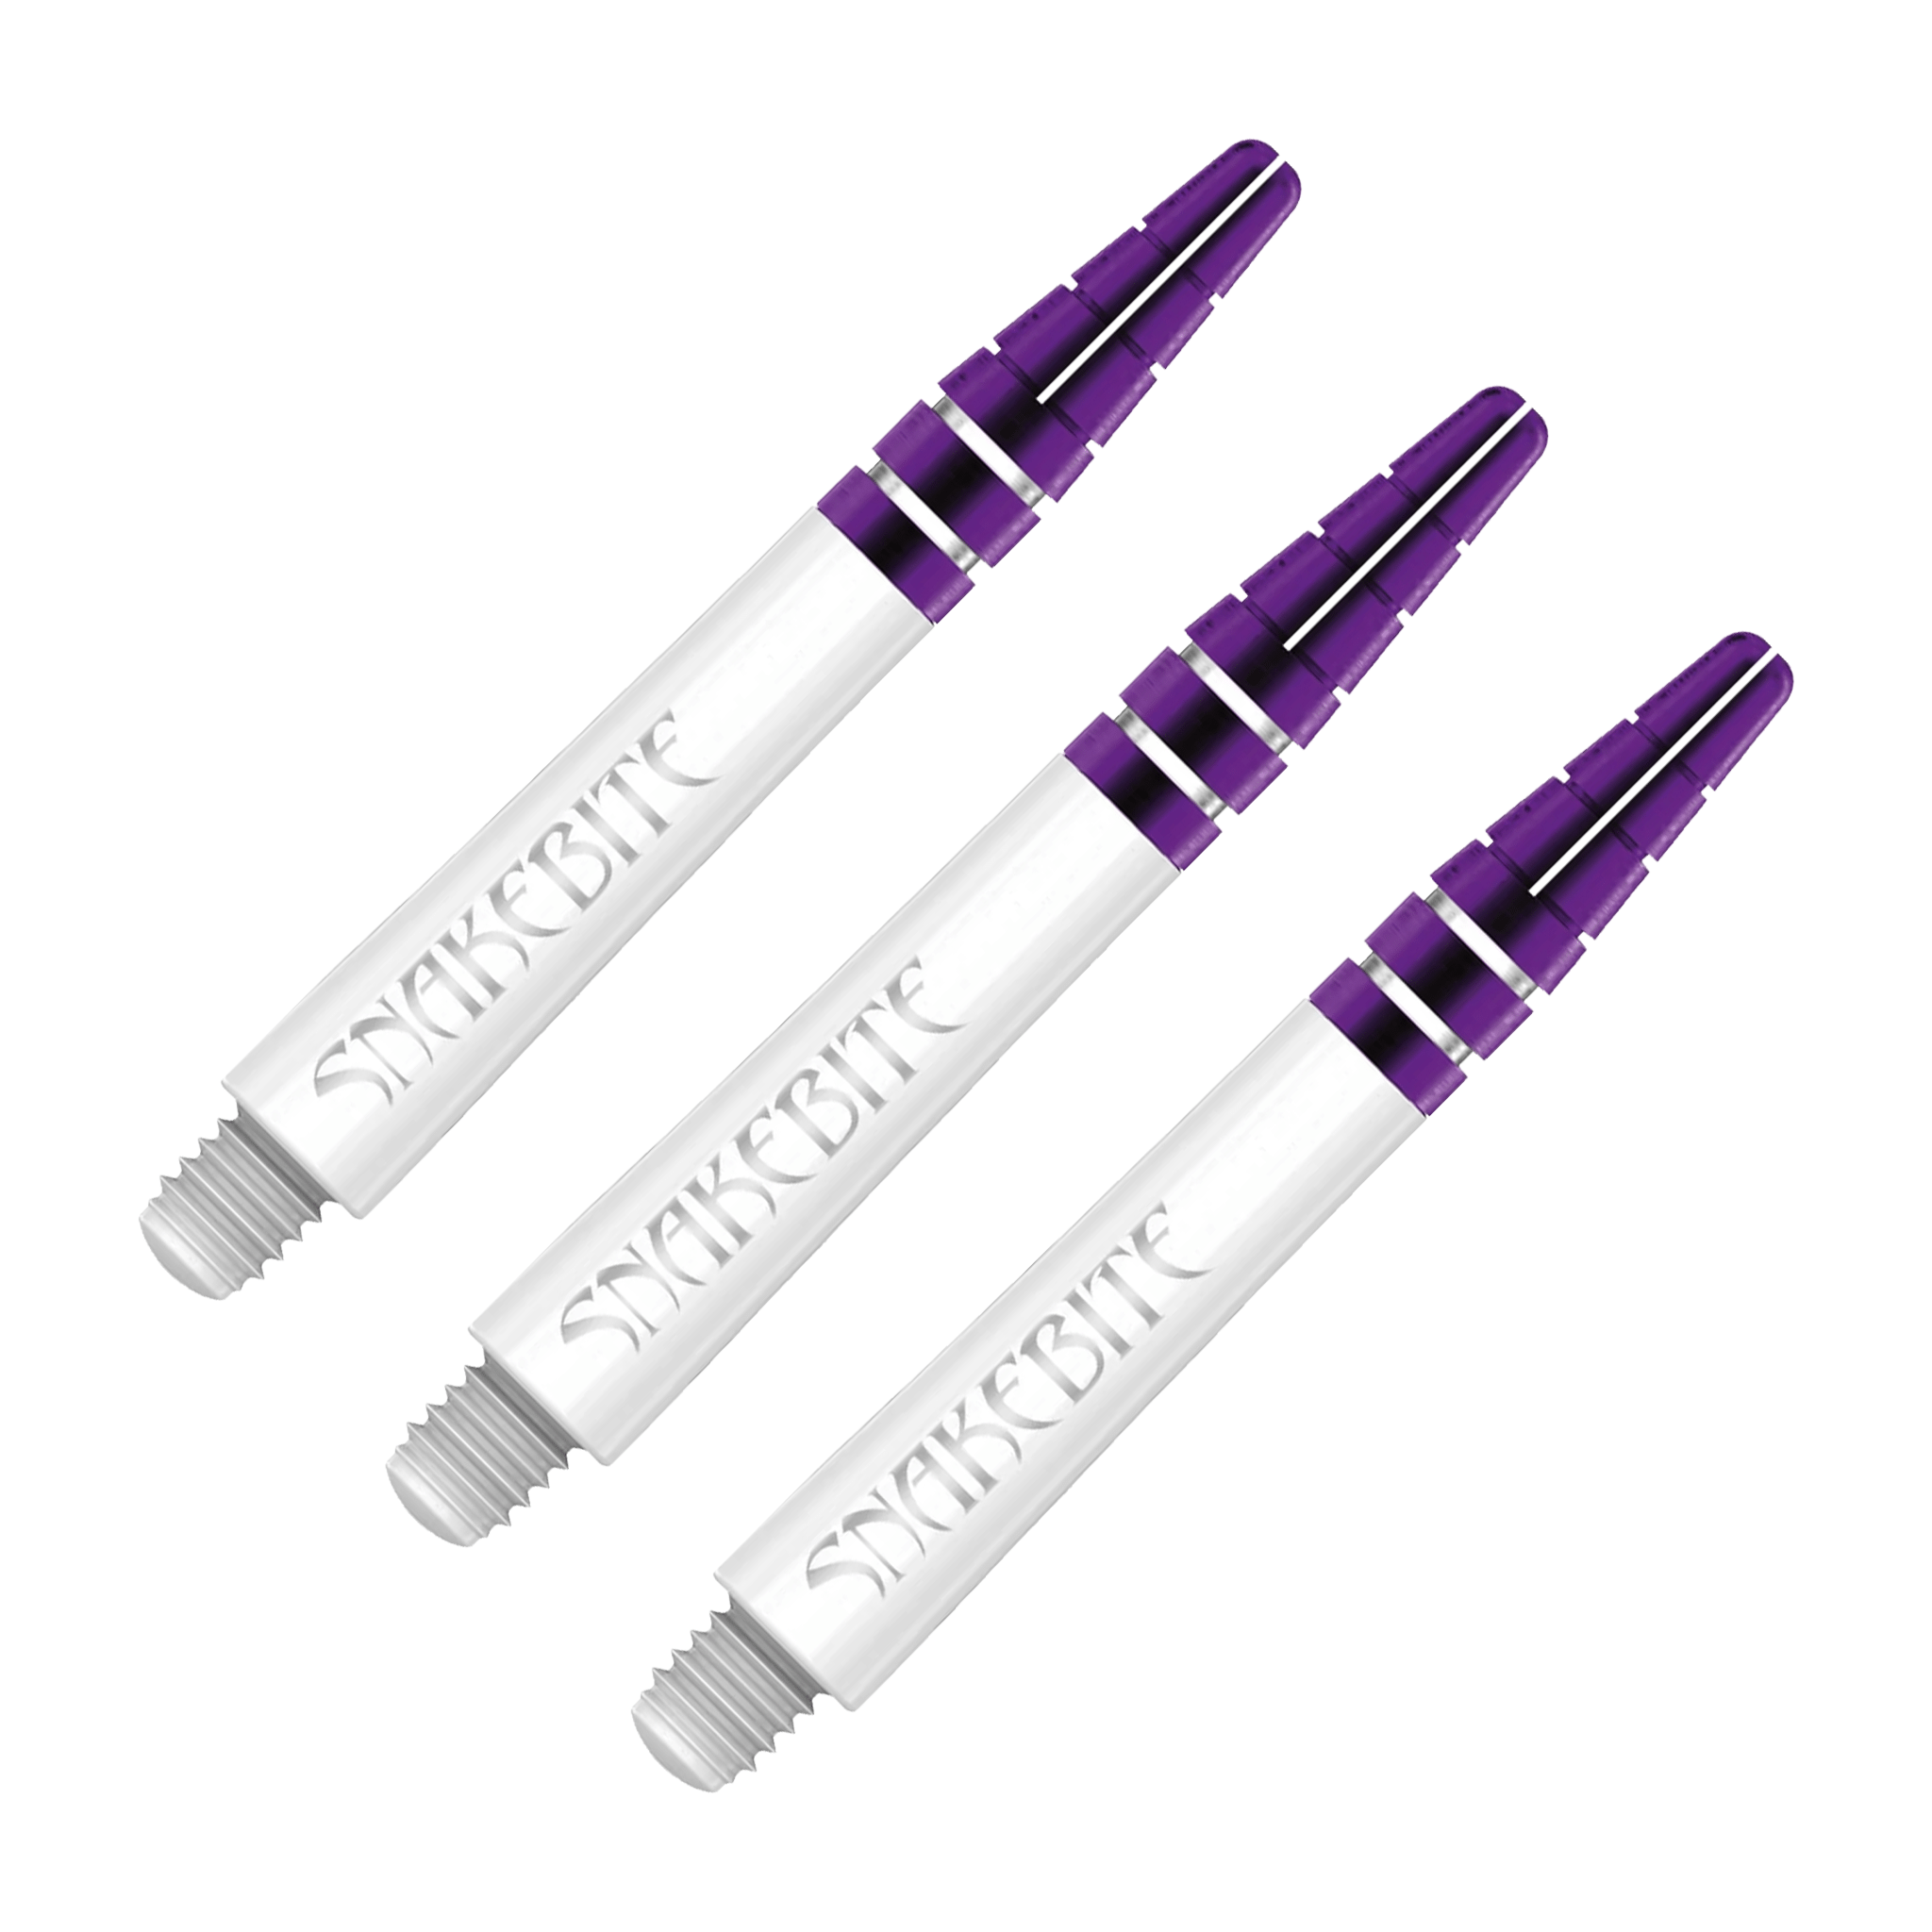 Red Dragon Peter Wright Snakebite Nitrotech - Polycarbonate Dart Shafts Intermediate (39mm) / White Shafts